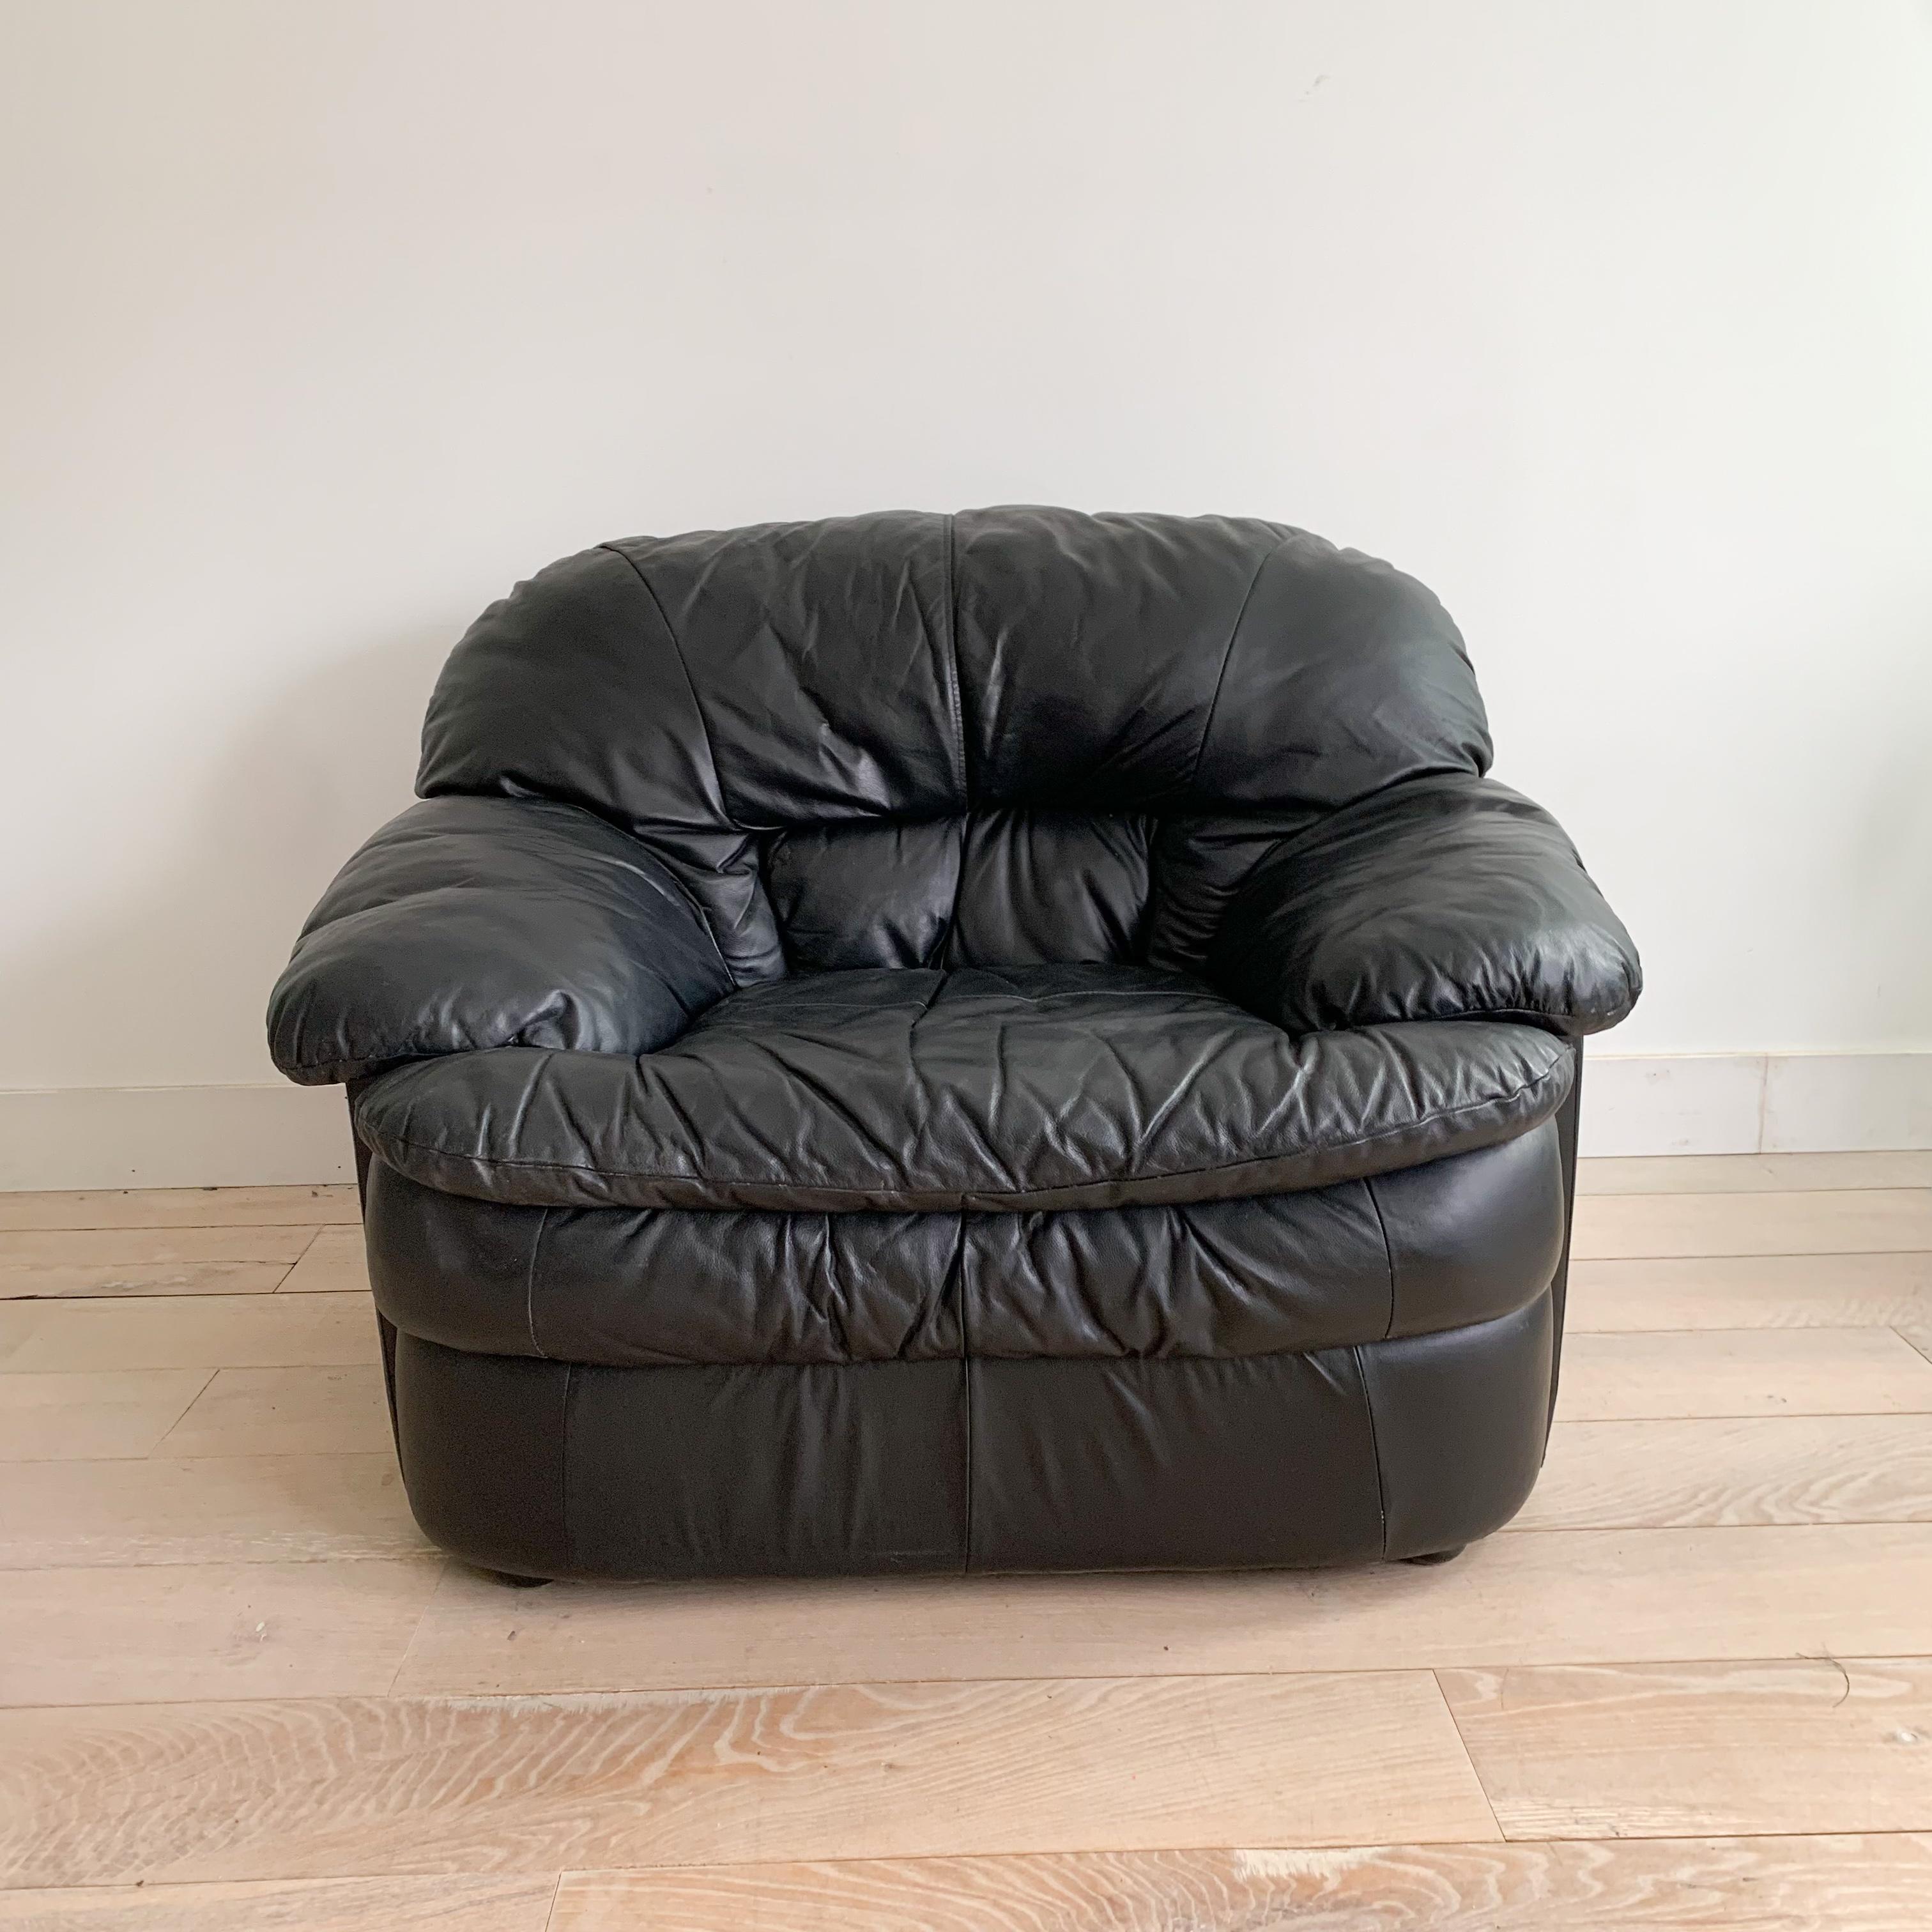 This comfortable postmodern lounge chair features luxurious black leather upholstery. It shows light scuffing and scratching from age and use, adding a touch of vintage charm.

Dimensions: 48” L x 41” W x 35” H (19” seat height)